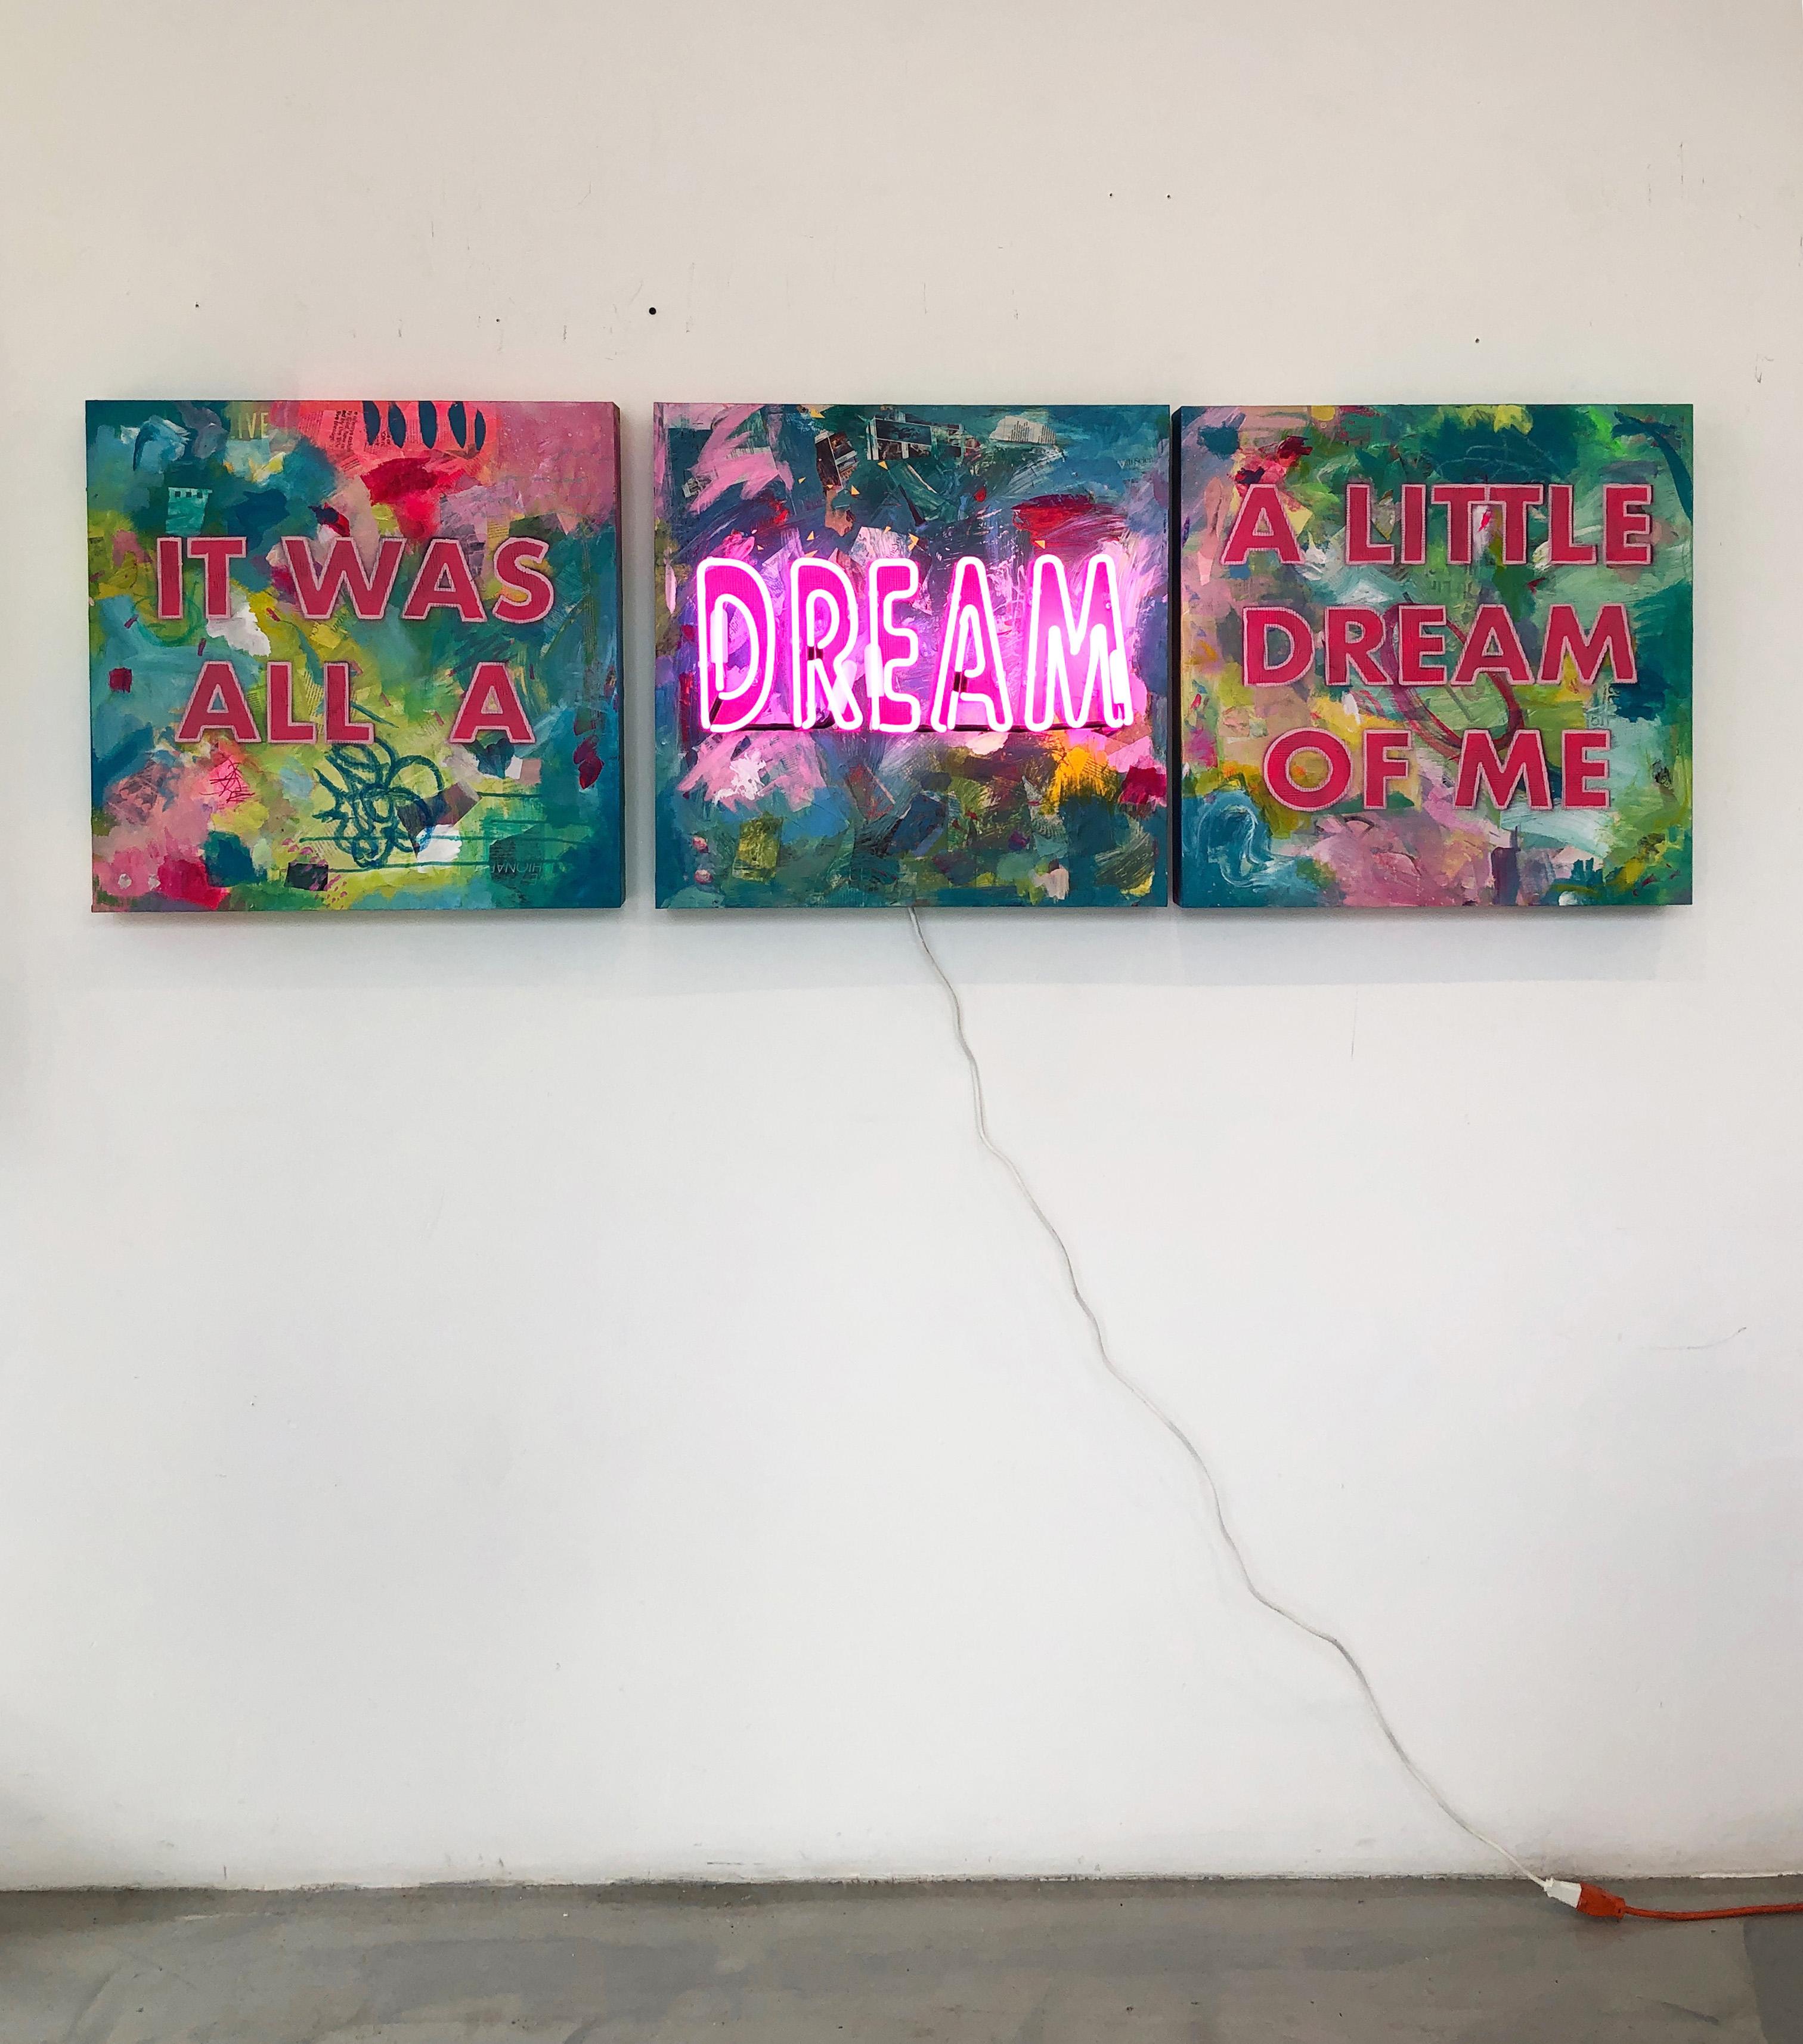  It Was All A Dream A Little Dream of Me - Triptych Acrylic on wood and Neon - Painting by Amy Smith